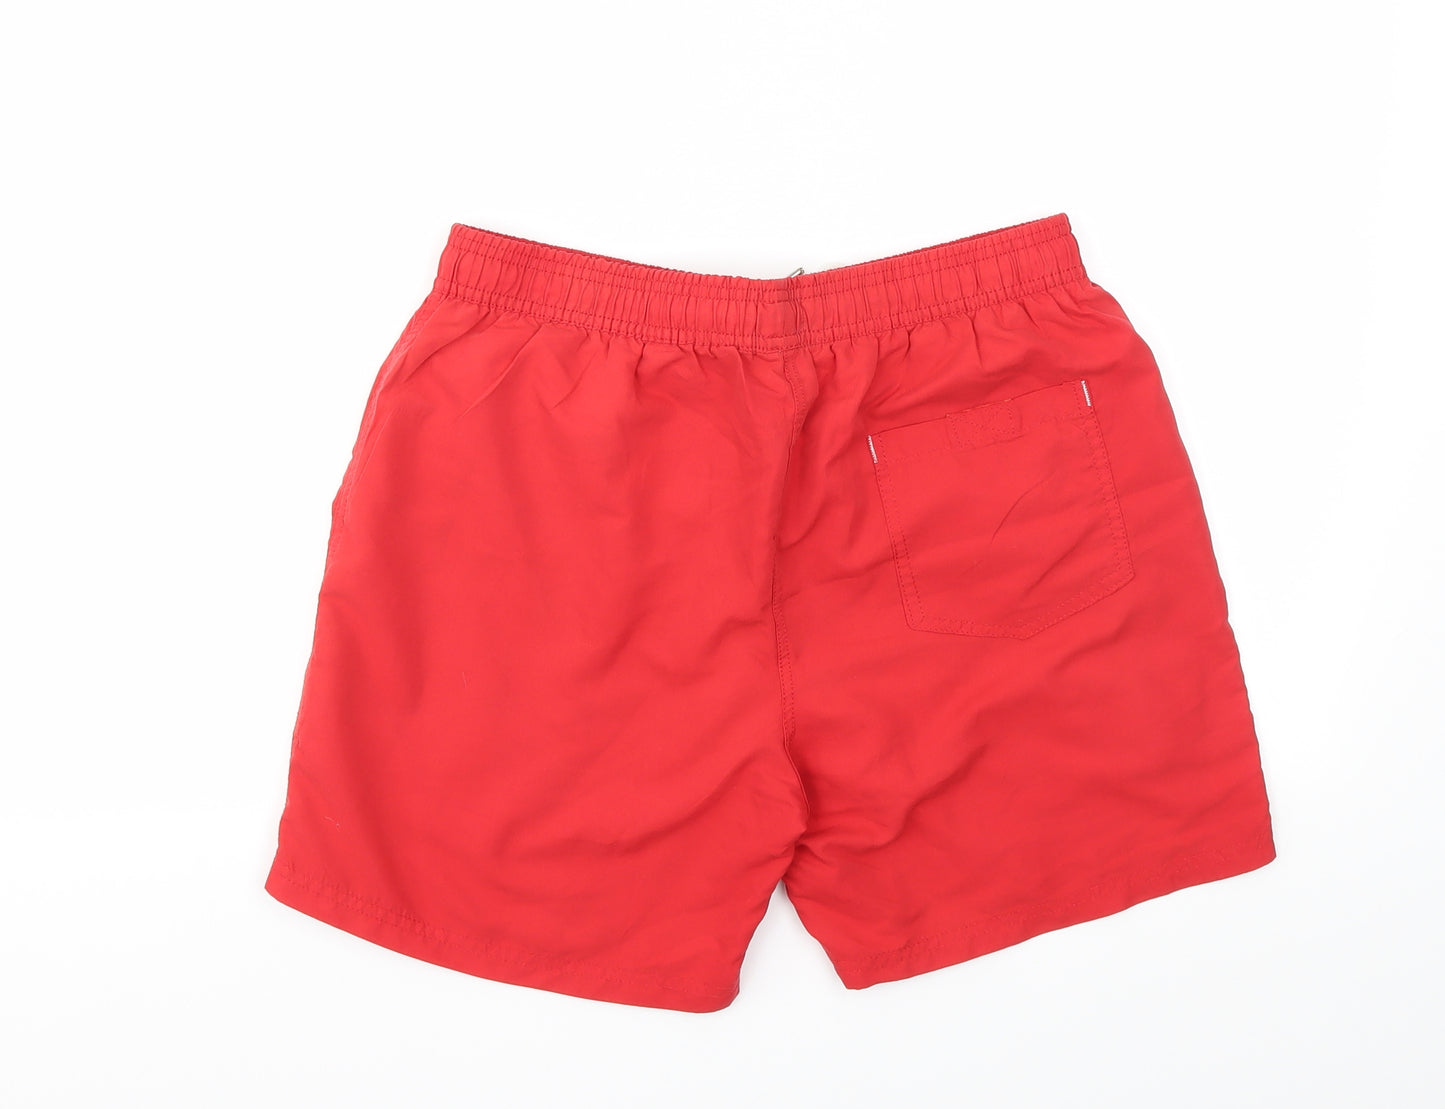 River Island Mens Red   Sweat Shorts Size 32 - Stretch waistband